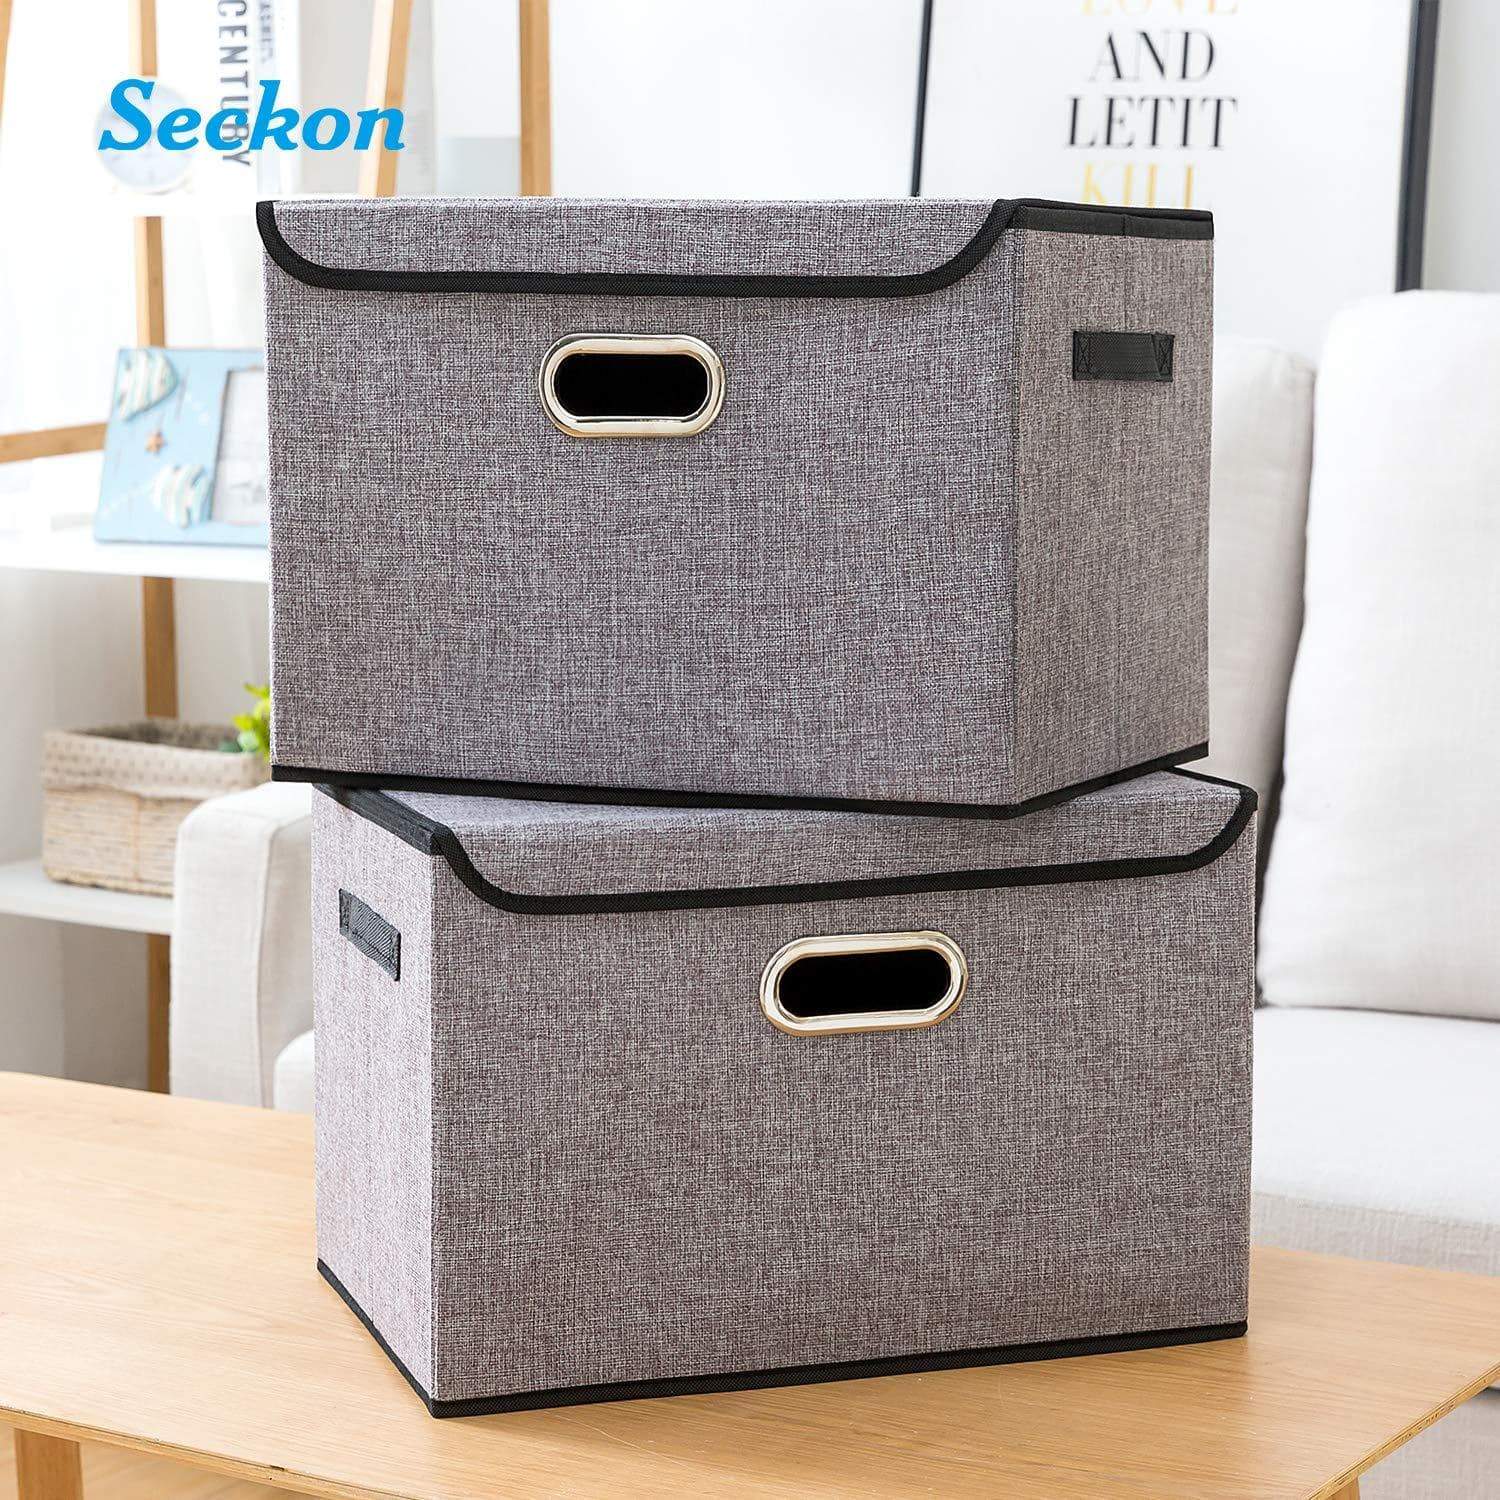 Exclusive seckon collapsible storage box container bins with lids covers2pack large odorless linen fabric storage organizers cube with metal handles for office bedroom closet toys